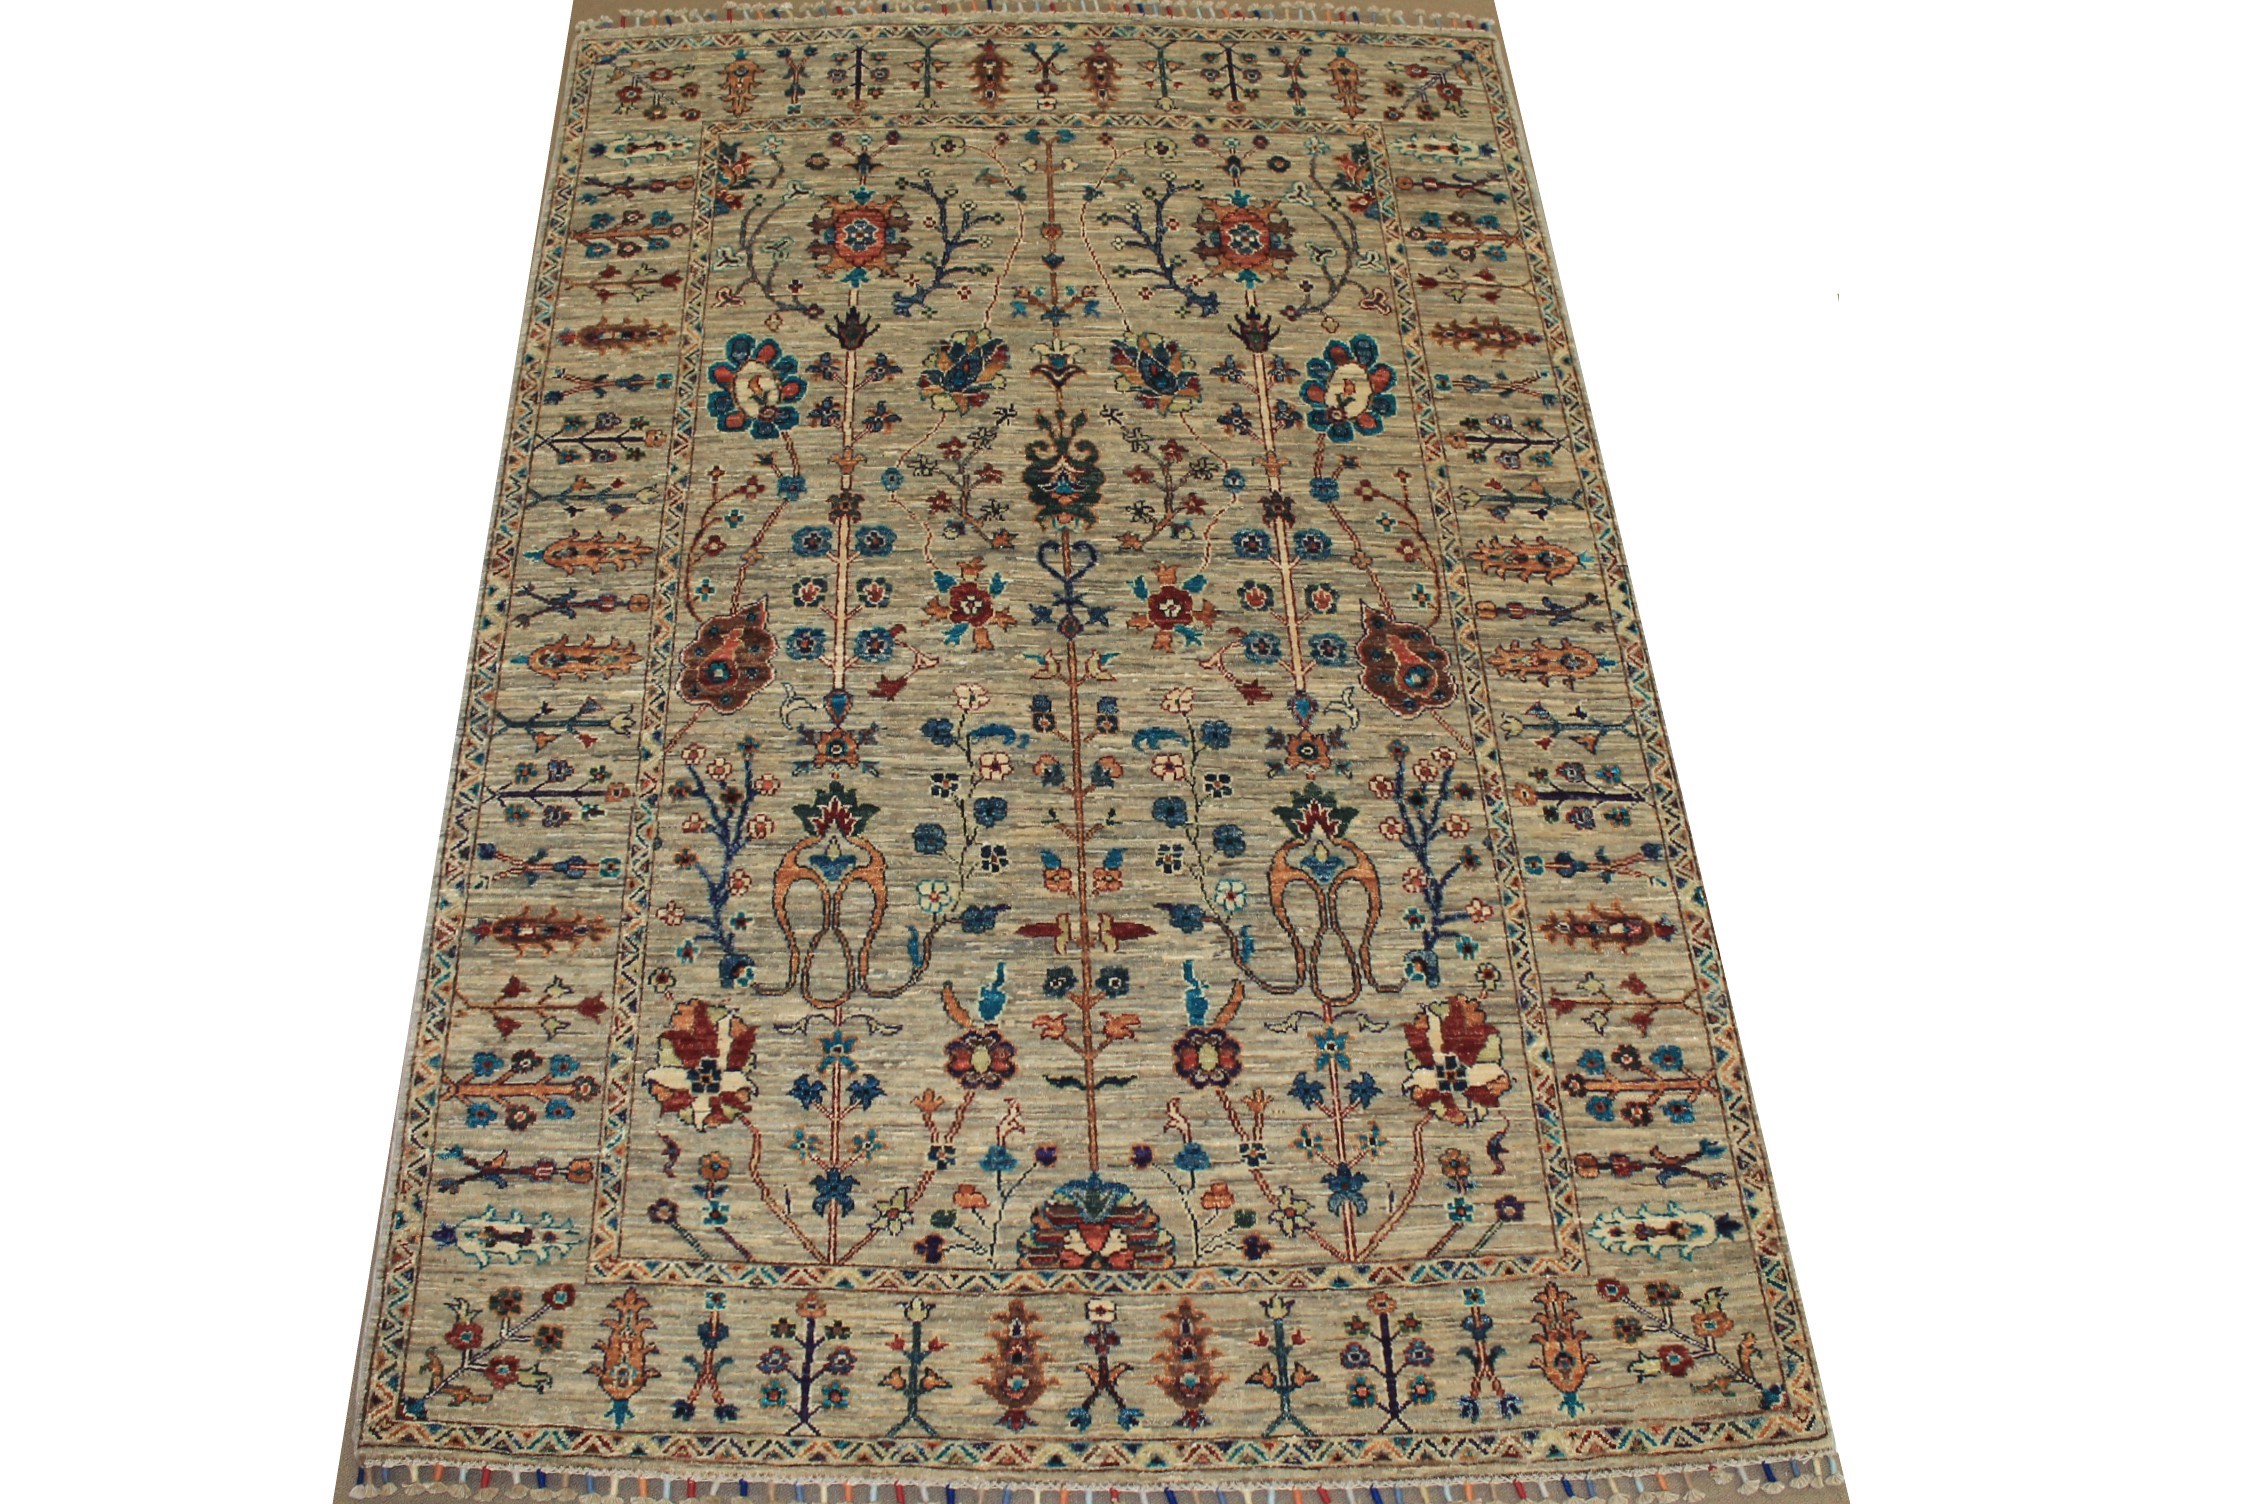 5x7/8 Tribal Hand Knotted Wool Area Rug - MR025310